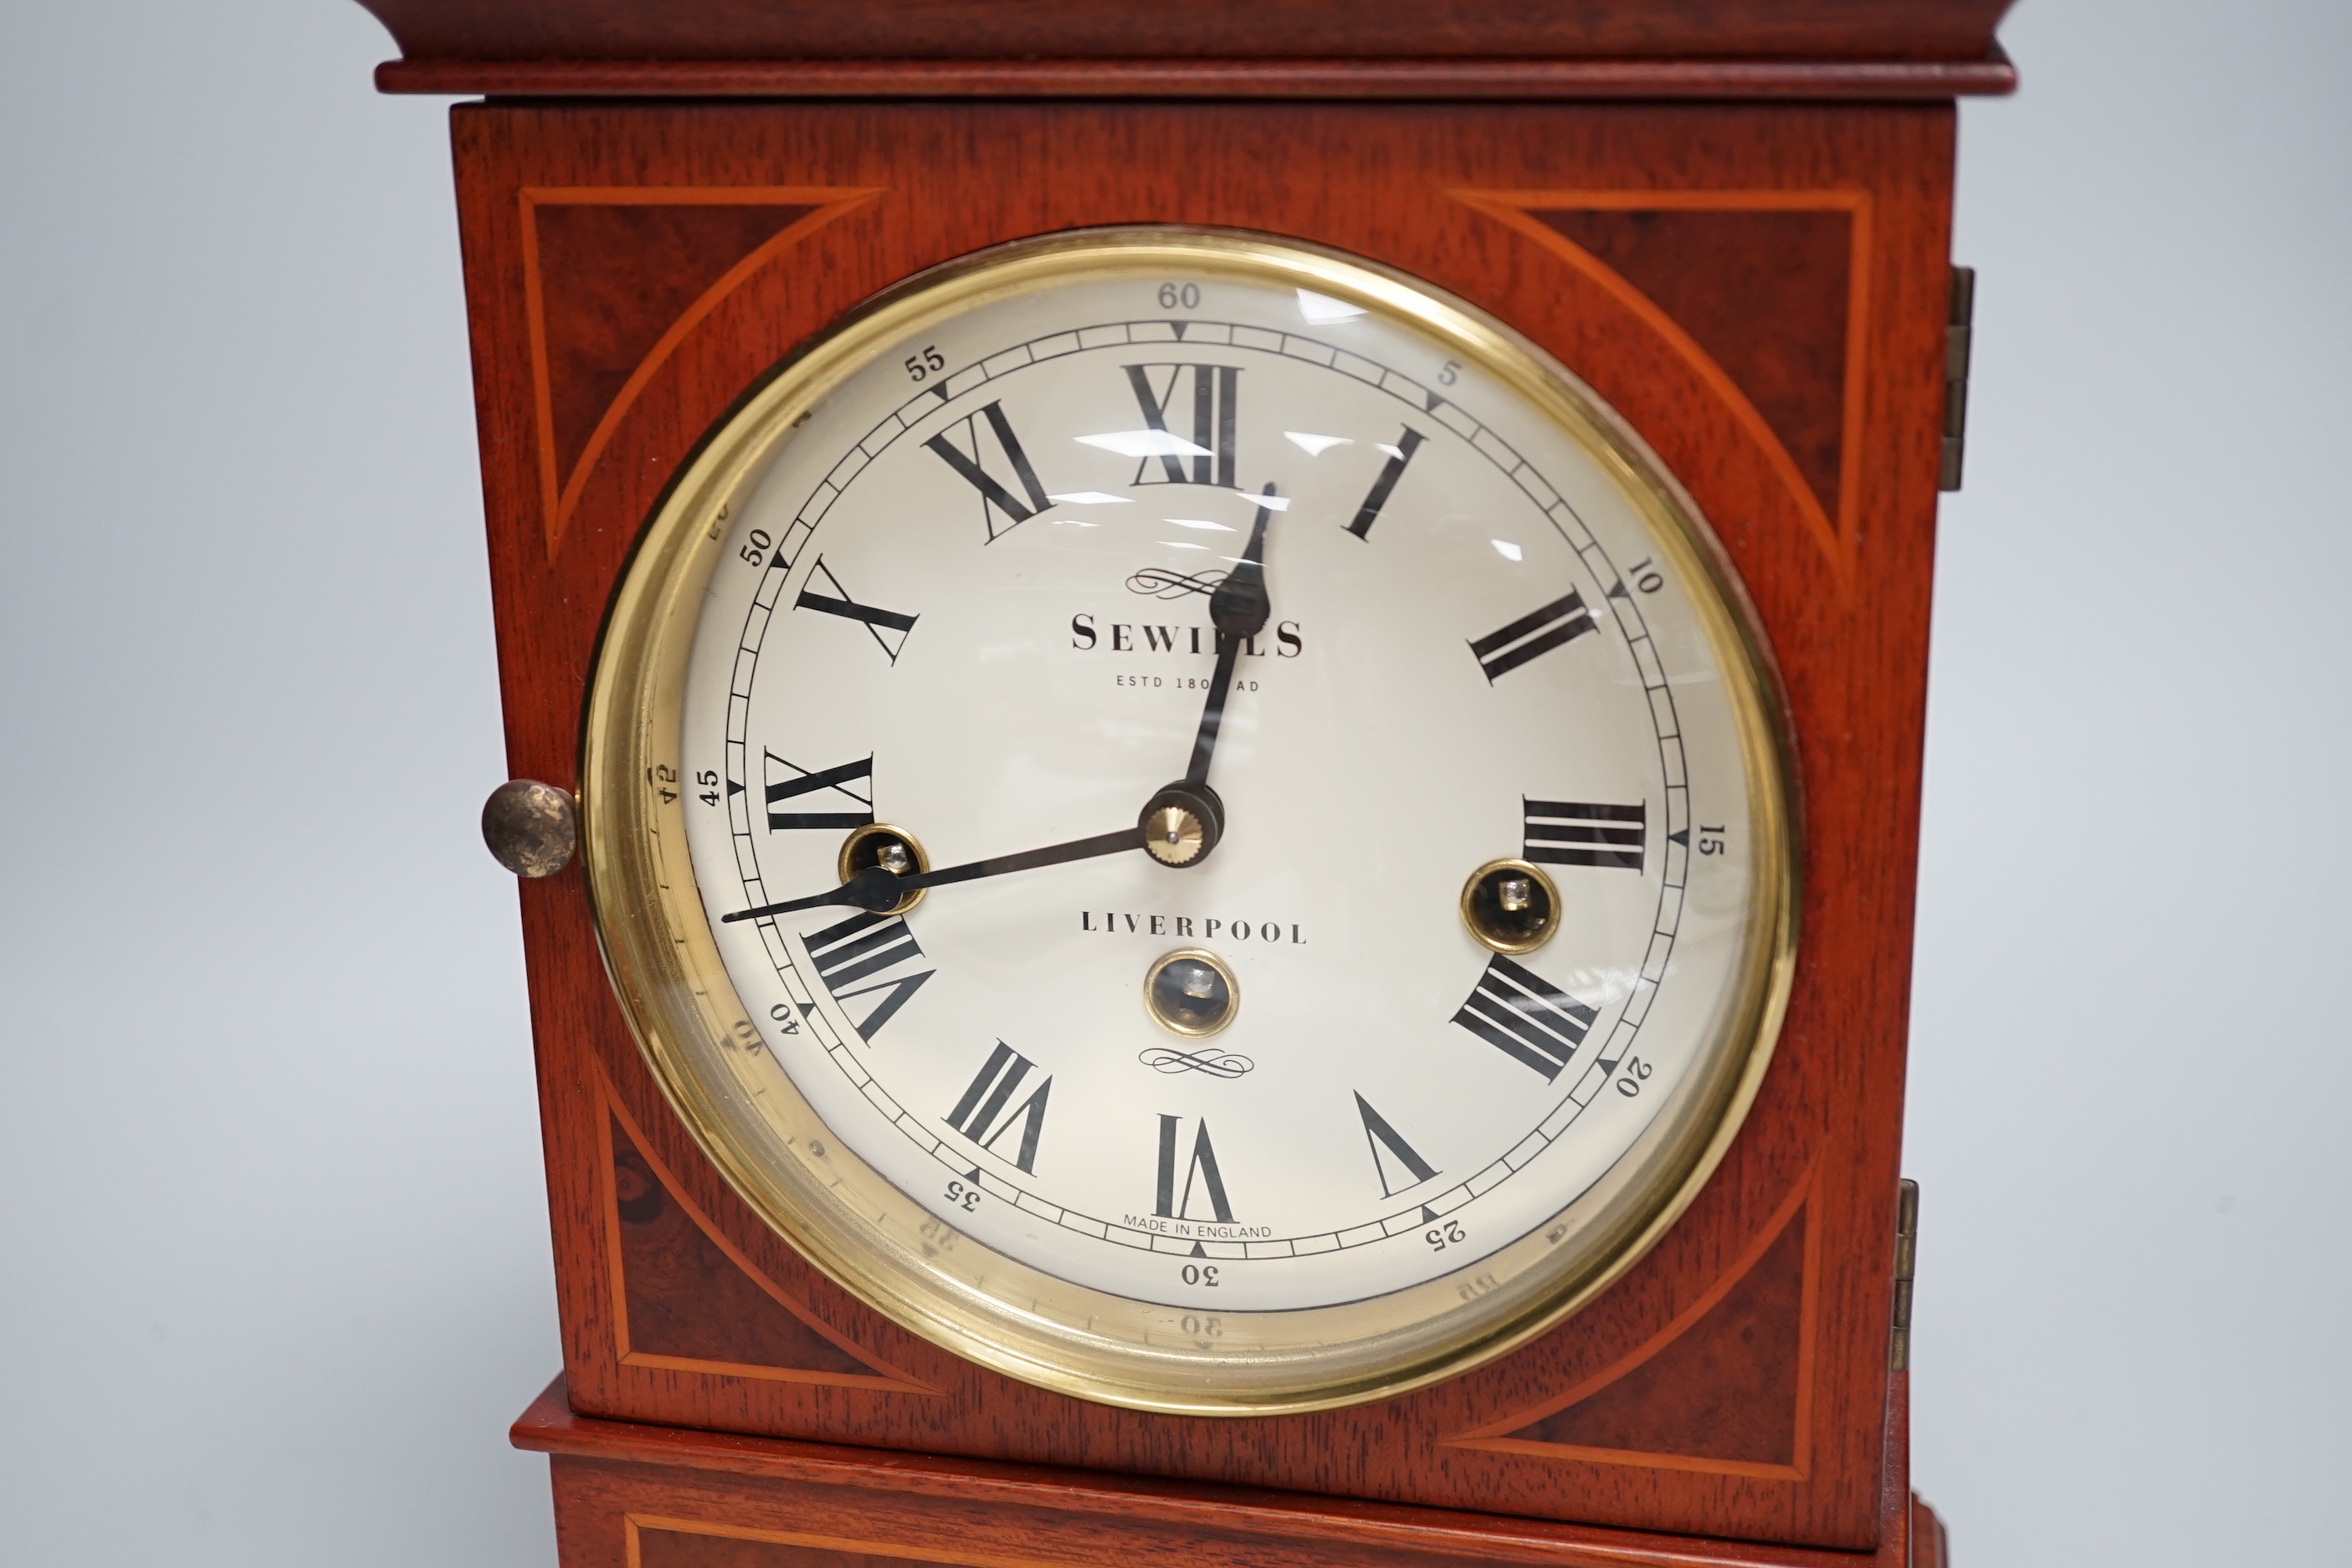 Sewills, Liverpool. An inlaid mantel clock with three train balance escapement movement, chiming - Image 2 of 6